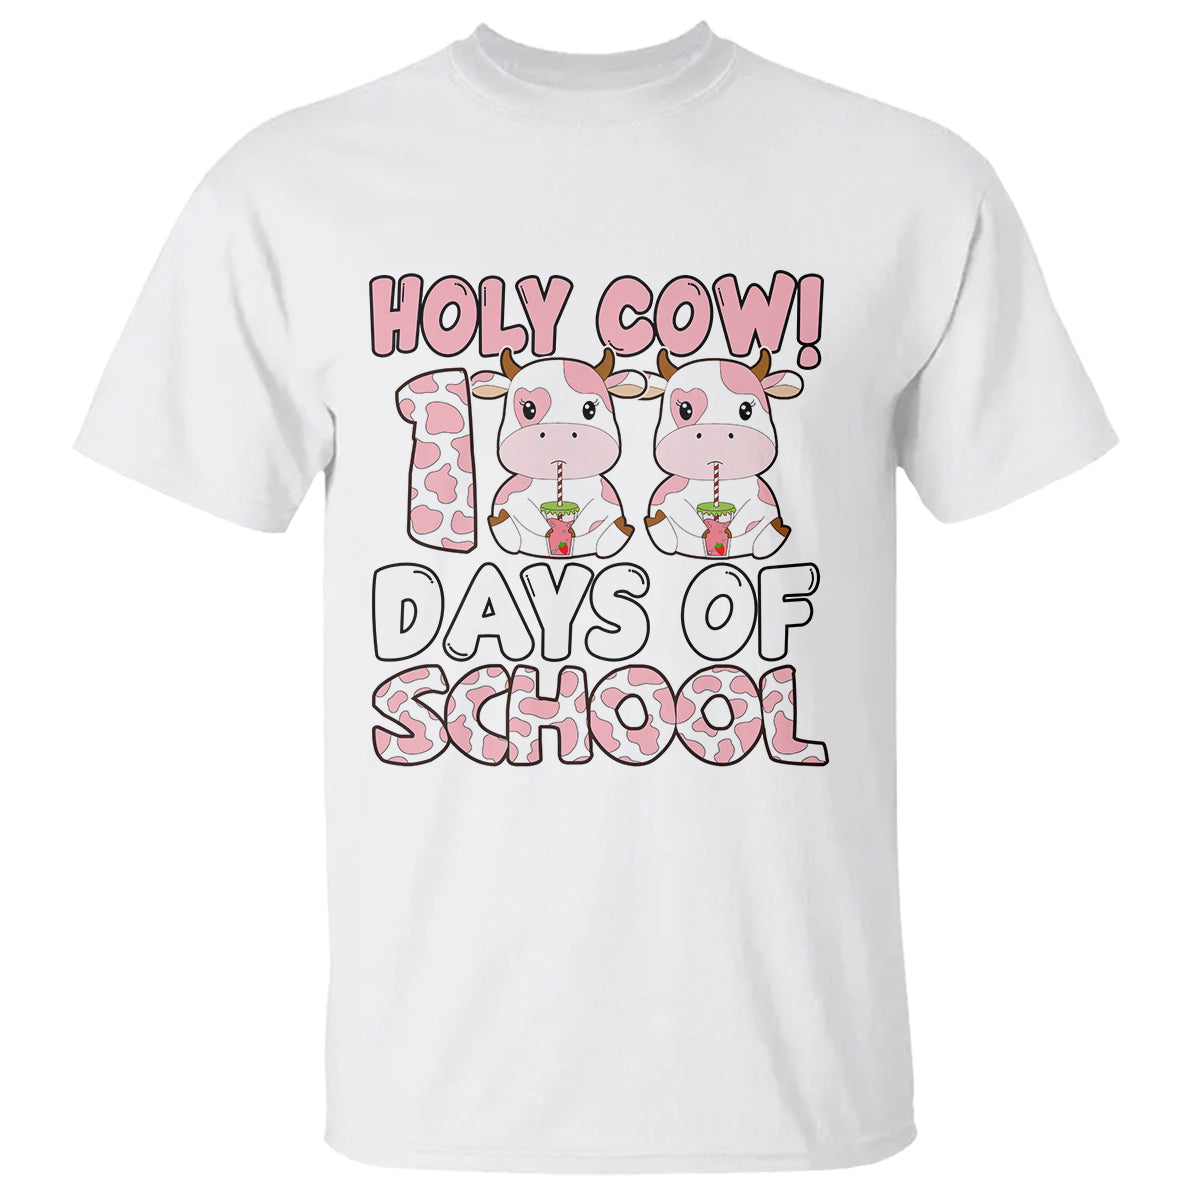 Holy Cow 100 Days of School T Shirt Cute Pink Dairy Cattle TS02 White ...